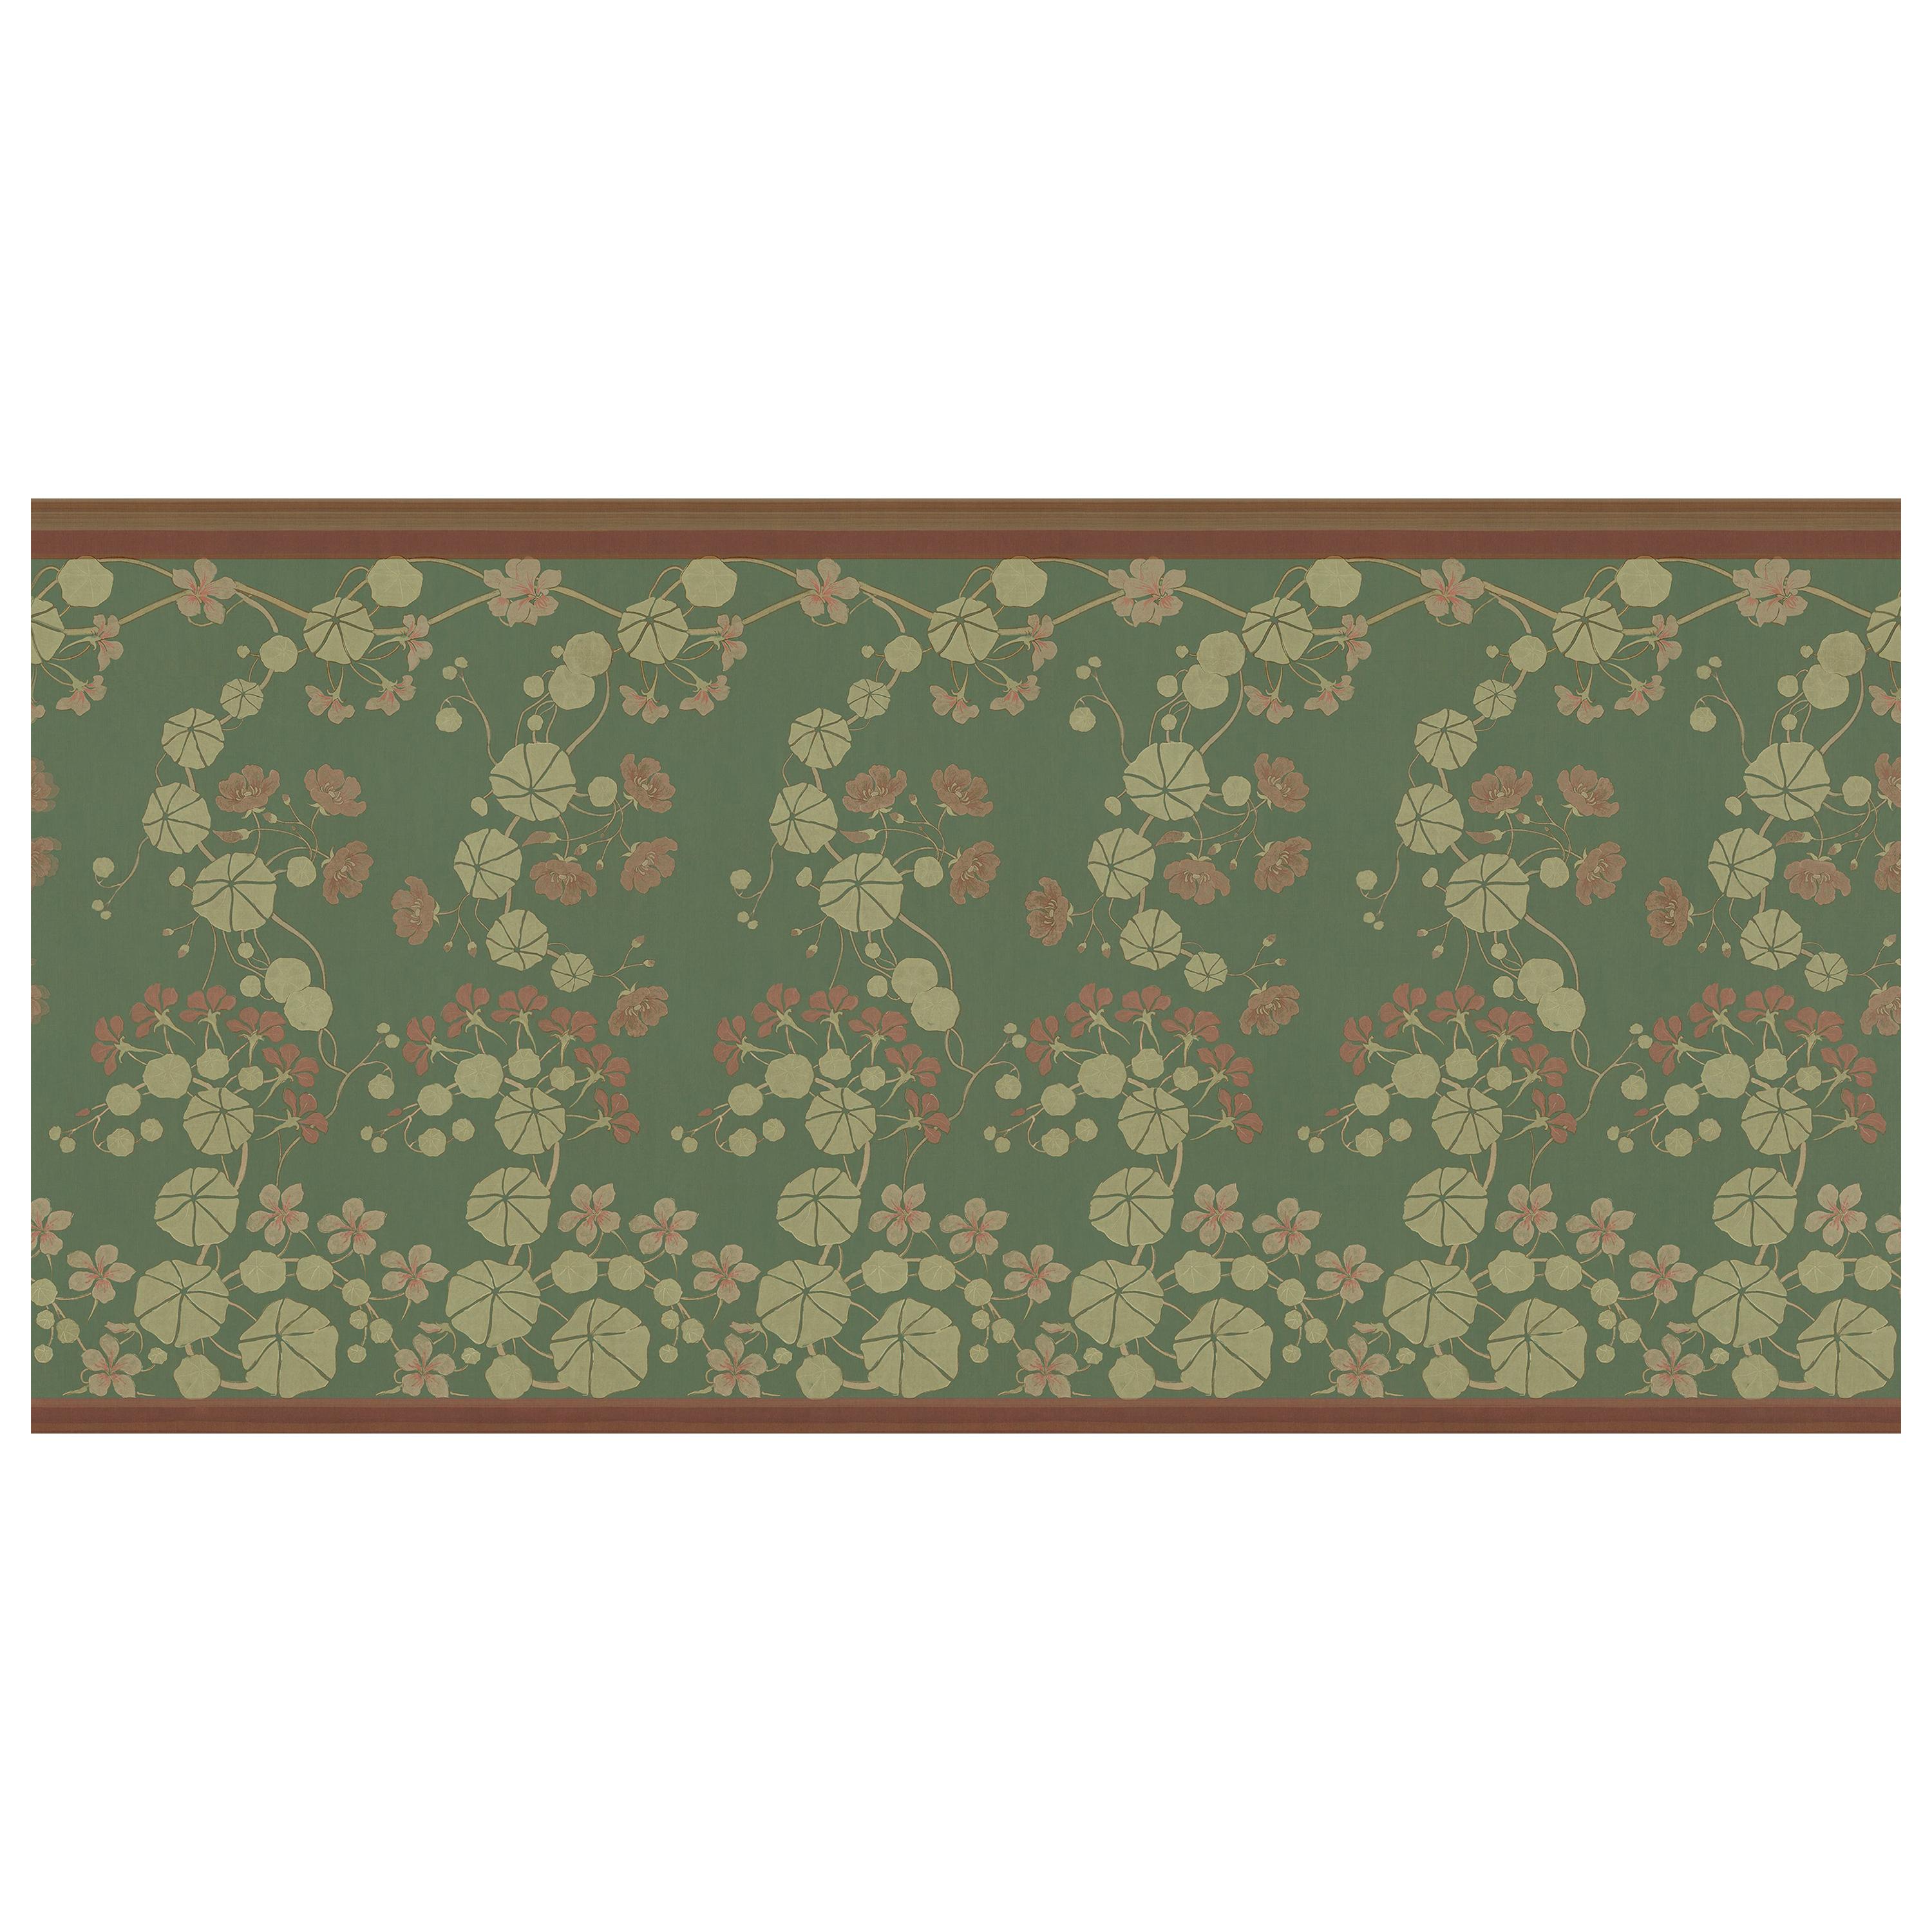 Ornami Art Nouveau Green Vinyl Wallpaper Made in Italy Digital Printing For Sale